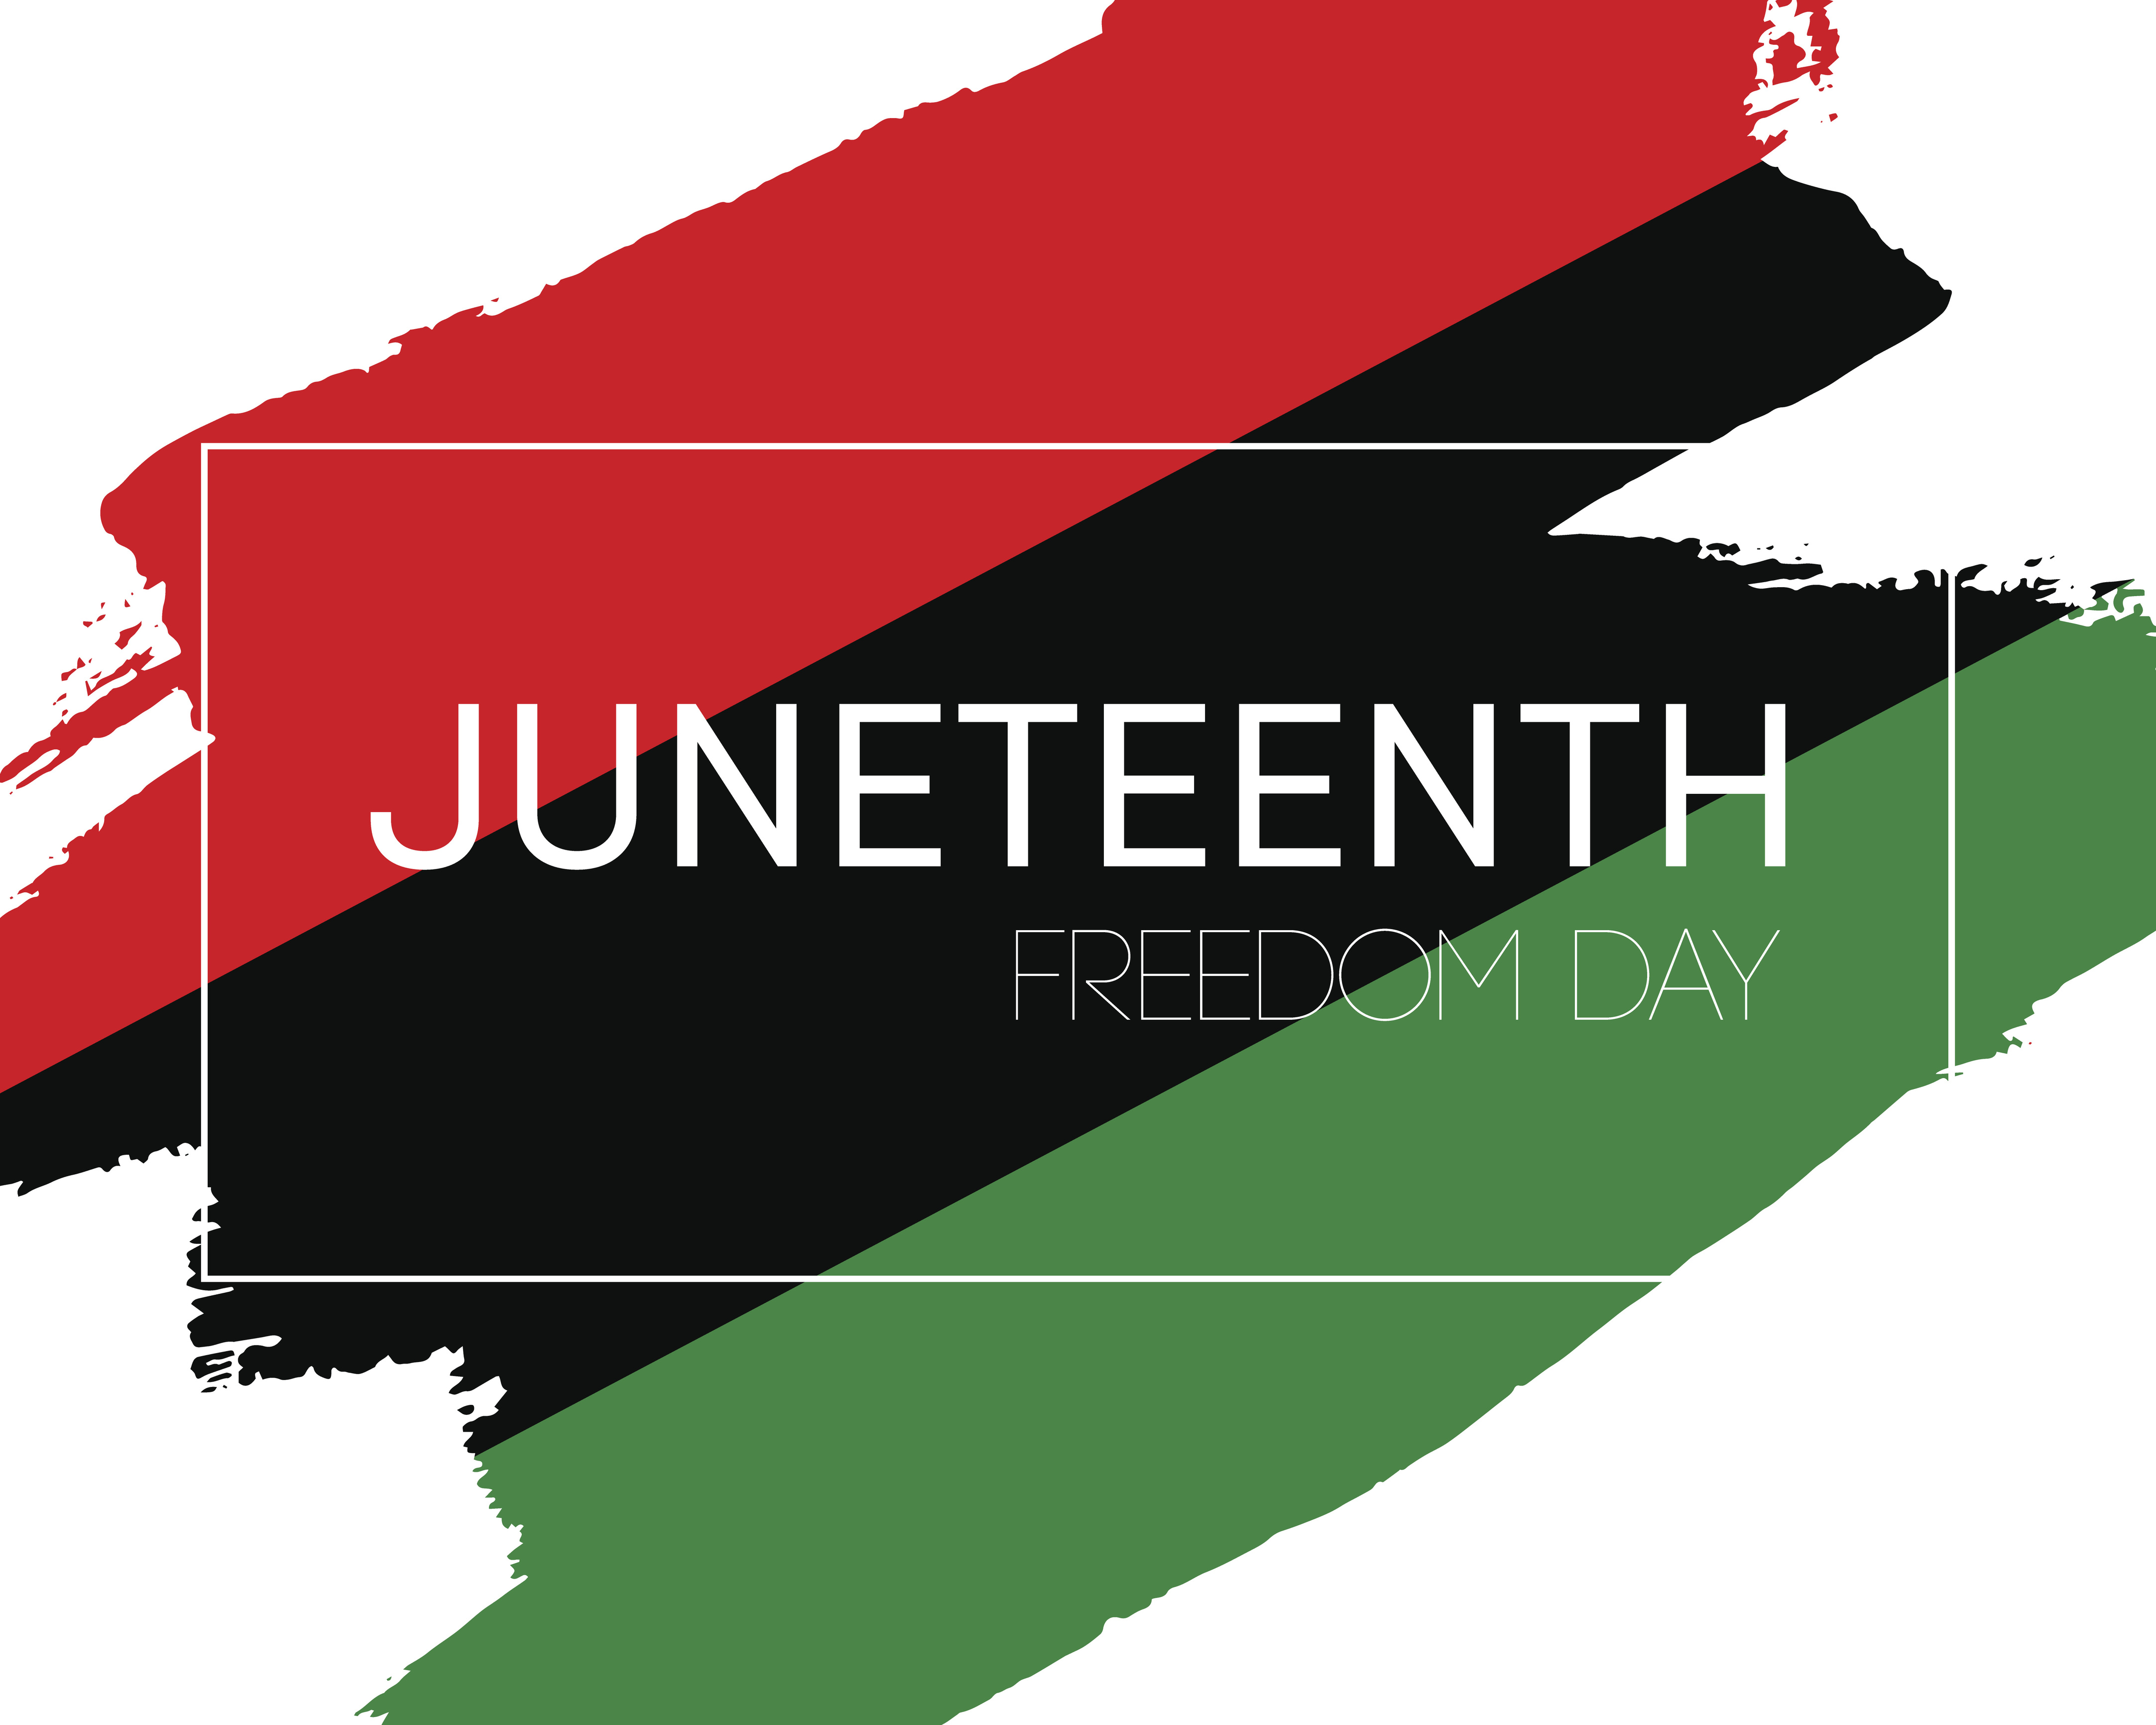 “Juneteenth“ in large text, “Freedom Day“ in smaller text, on red, black, and green painted stripes